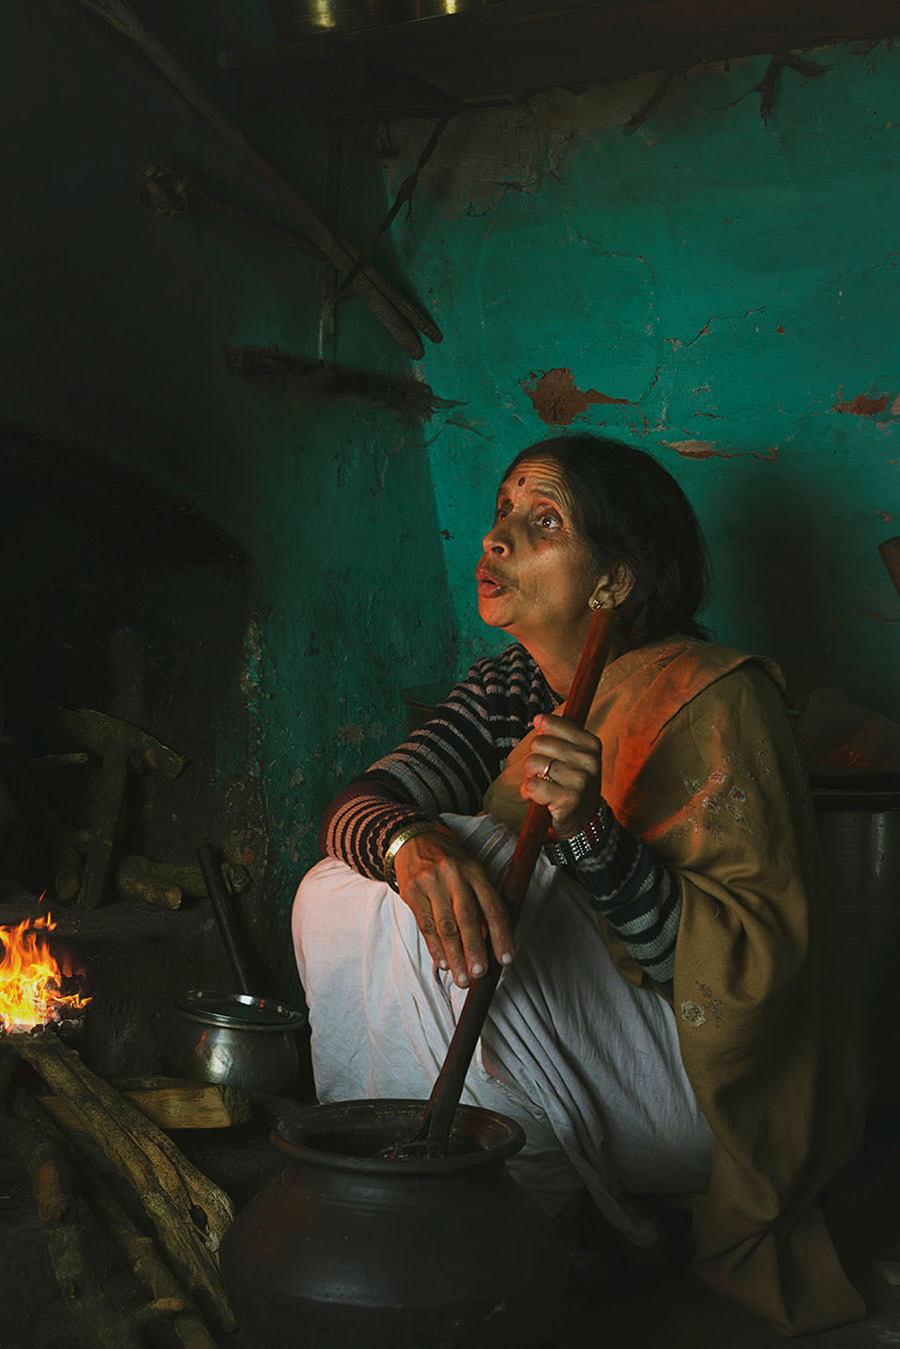 Toda People: Our Journey Into The Forgone Era Begins - Photo Series By Ashwin Pk